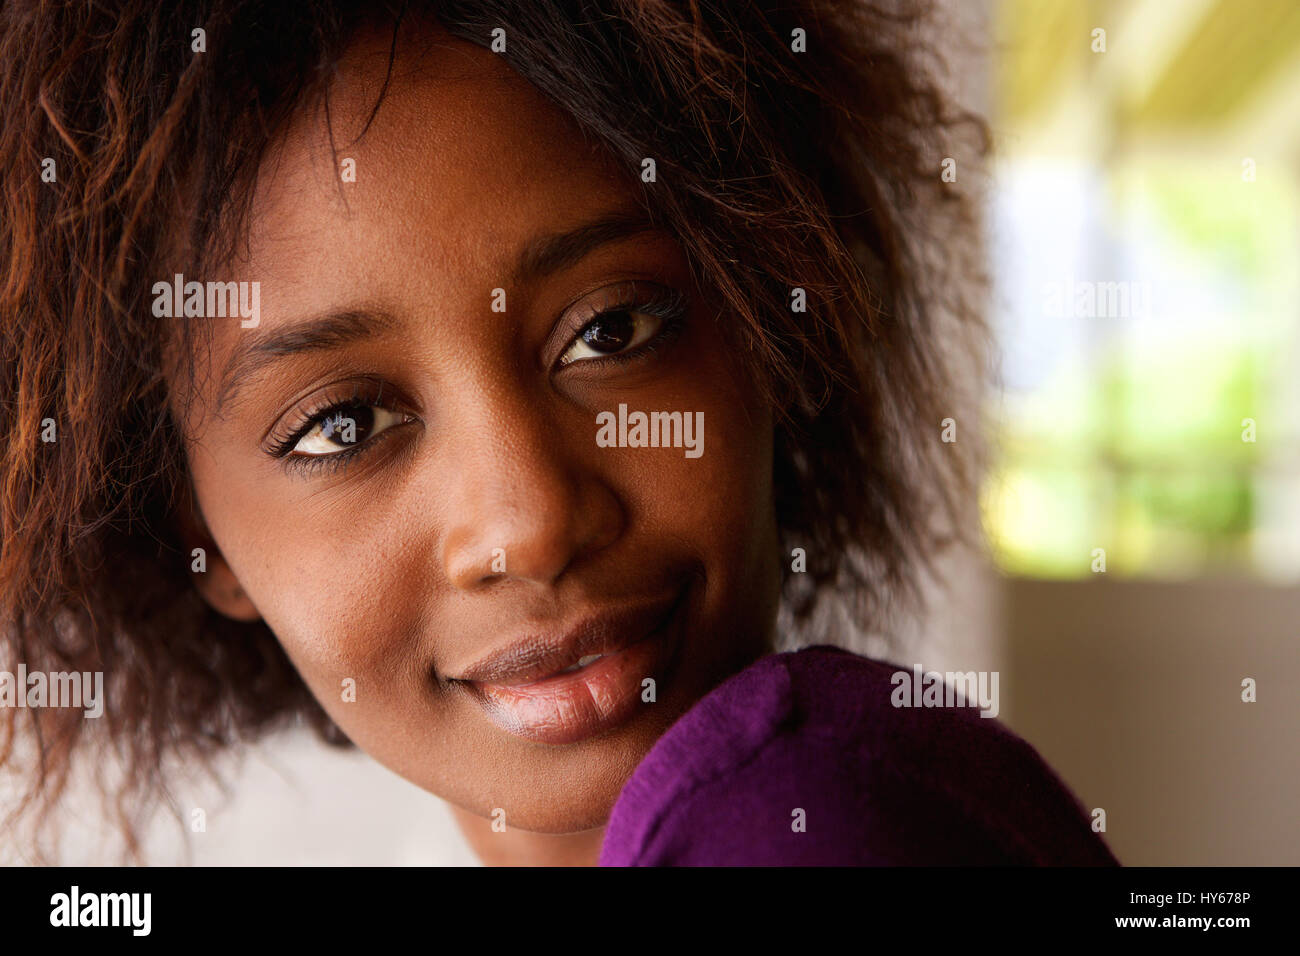 Close up portrait of a beautiful young african american woman looking at camera Banque D'Images